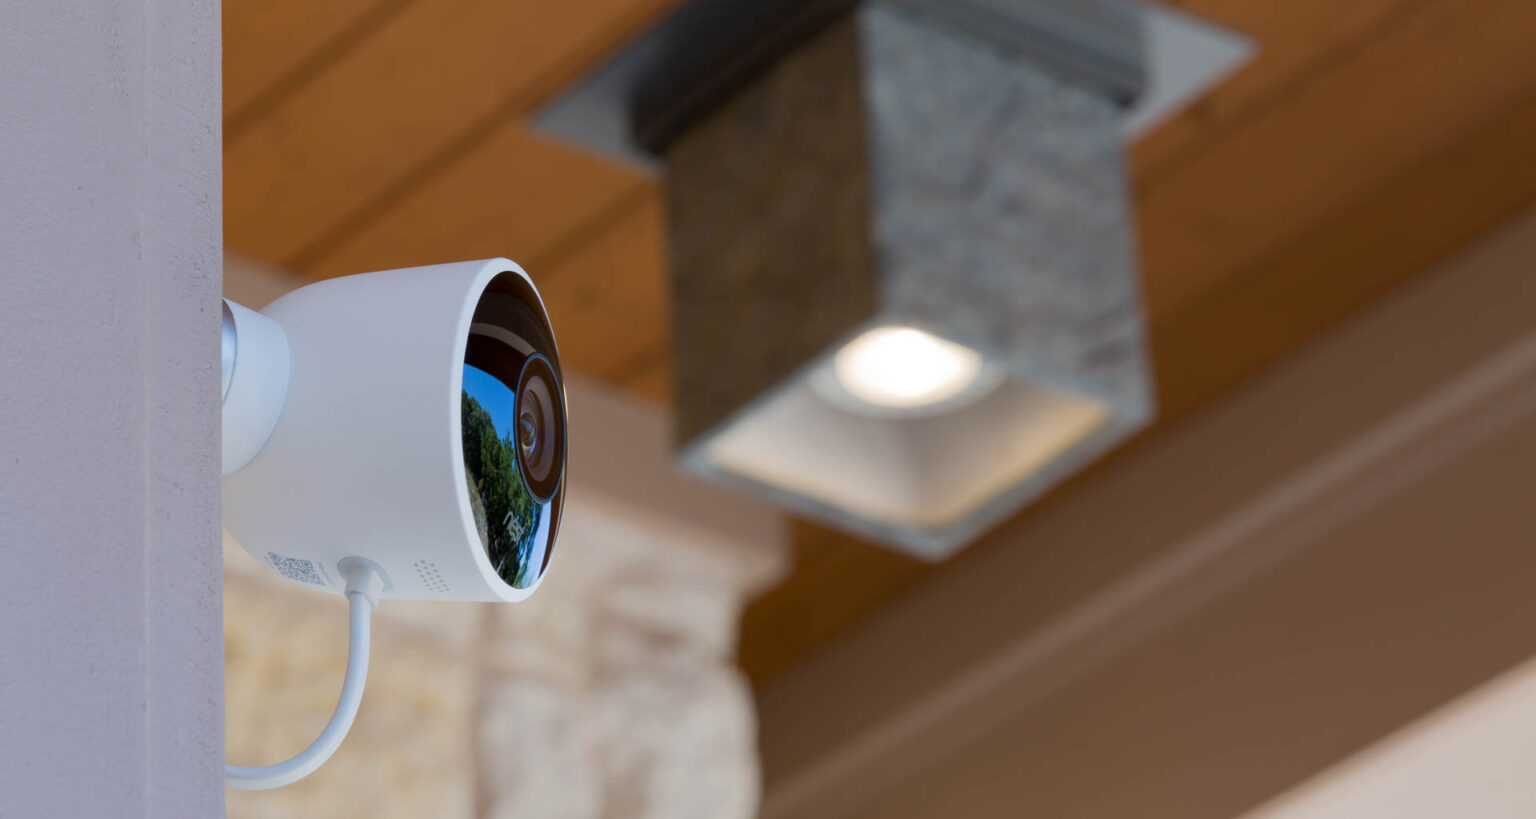 Want the capability to review your security camera's video history? You may need to buy a subscription plan. Image: Digitized House.